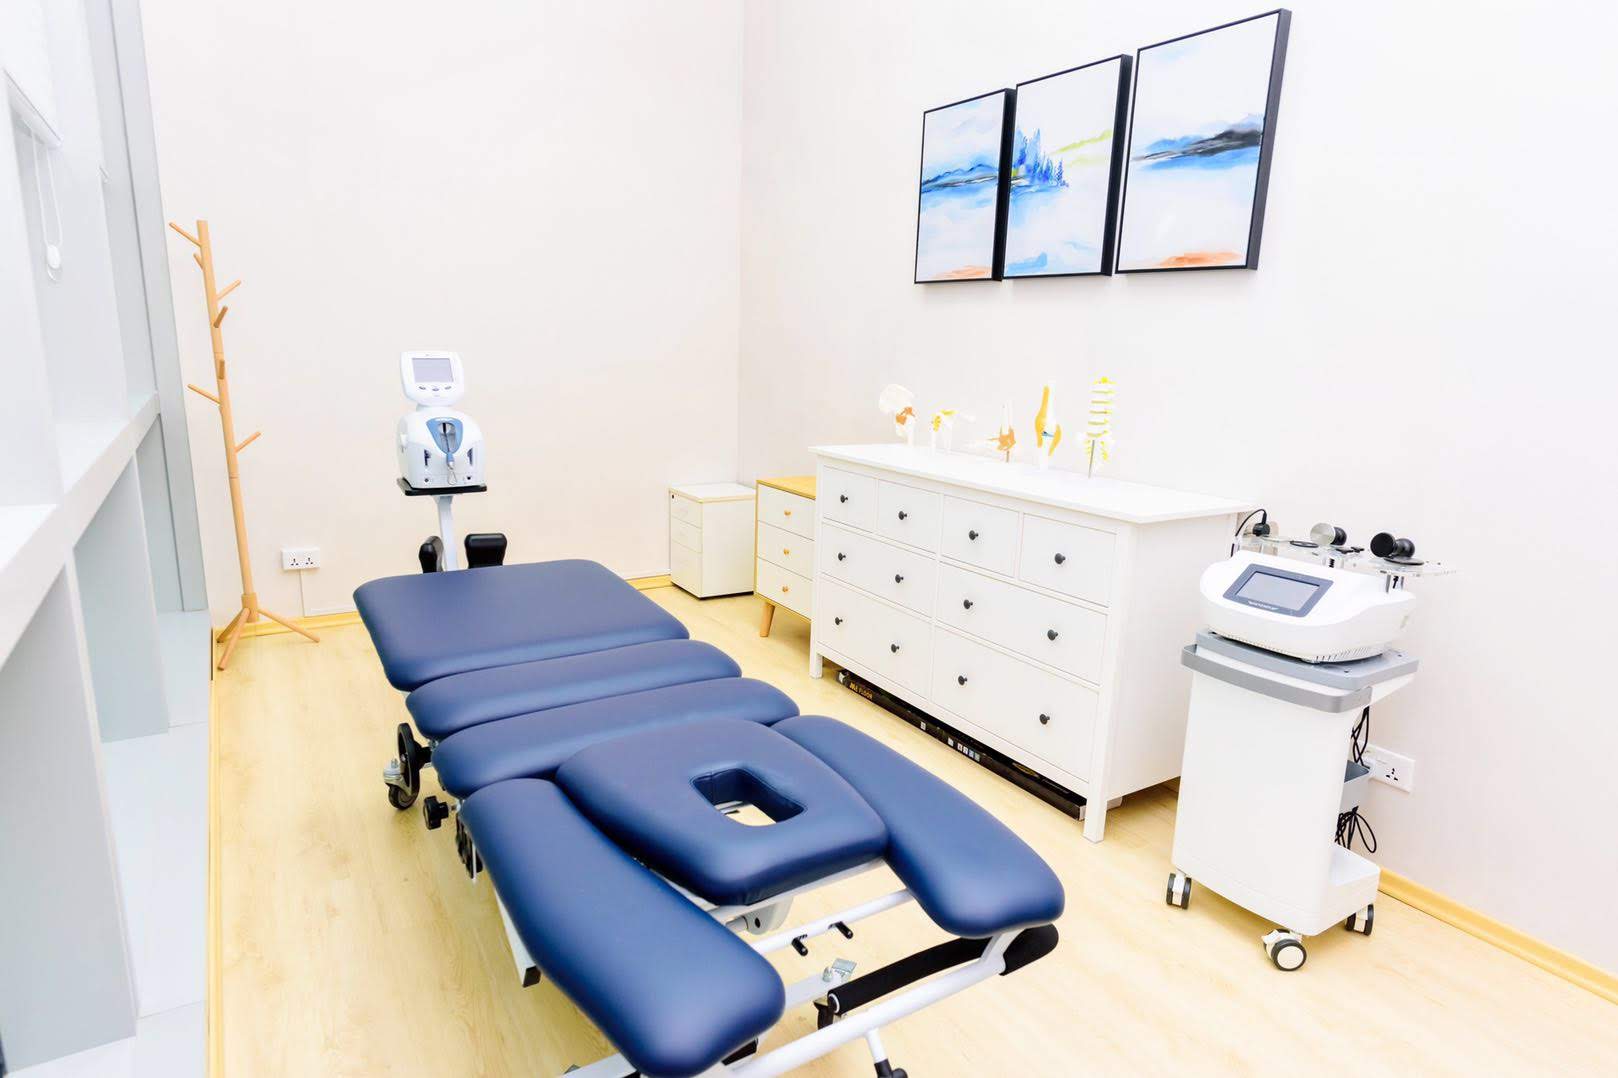 Inside Advanced Physio Care clinic, blue traction table. white room and paintings